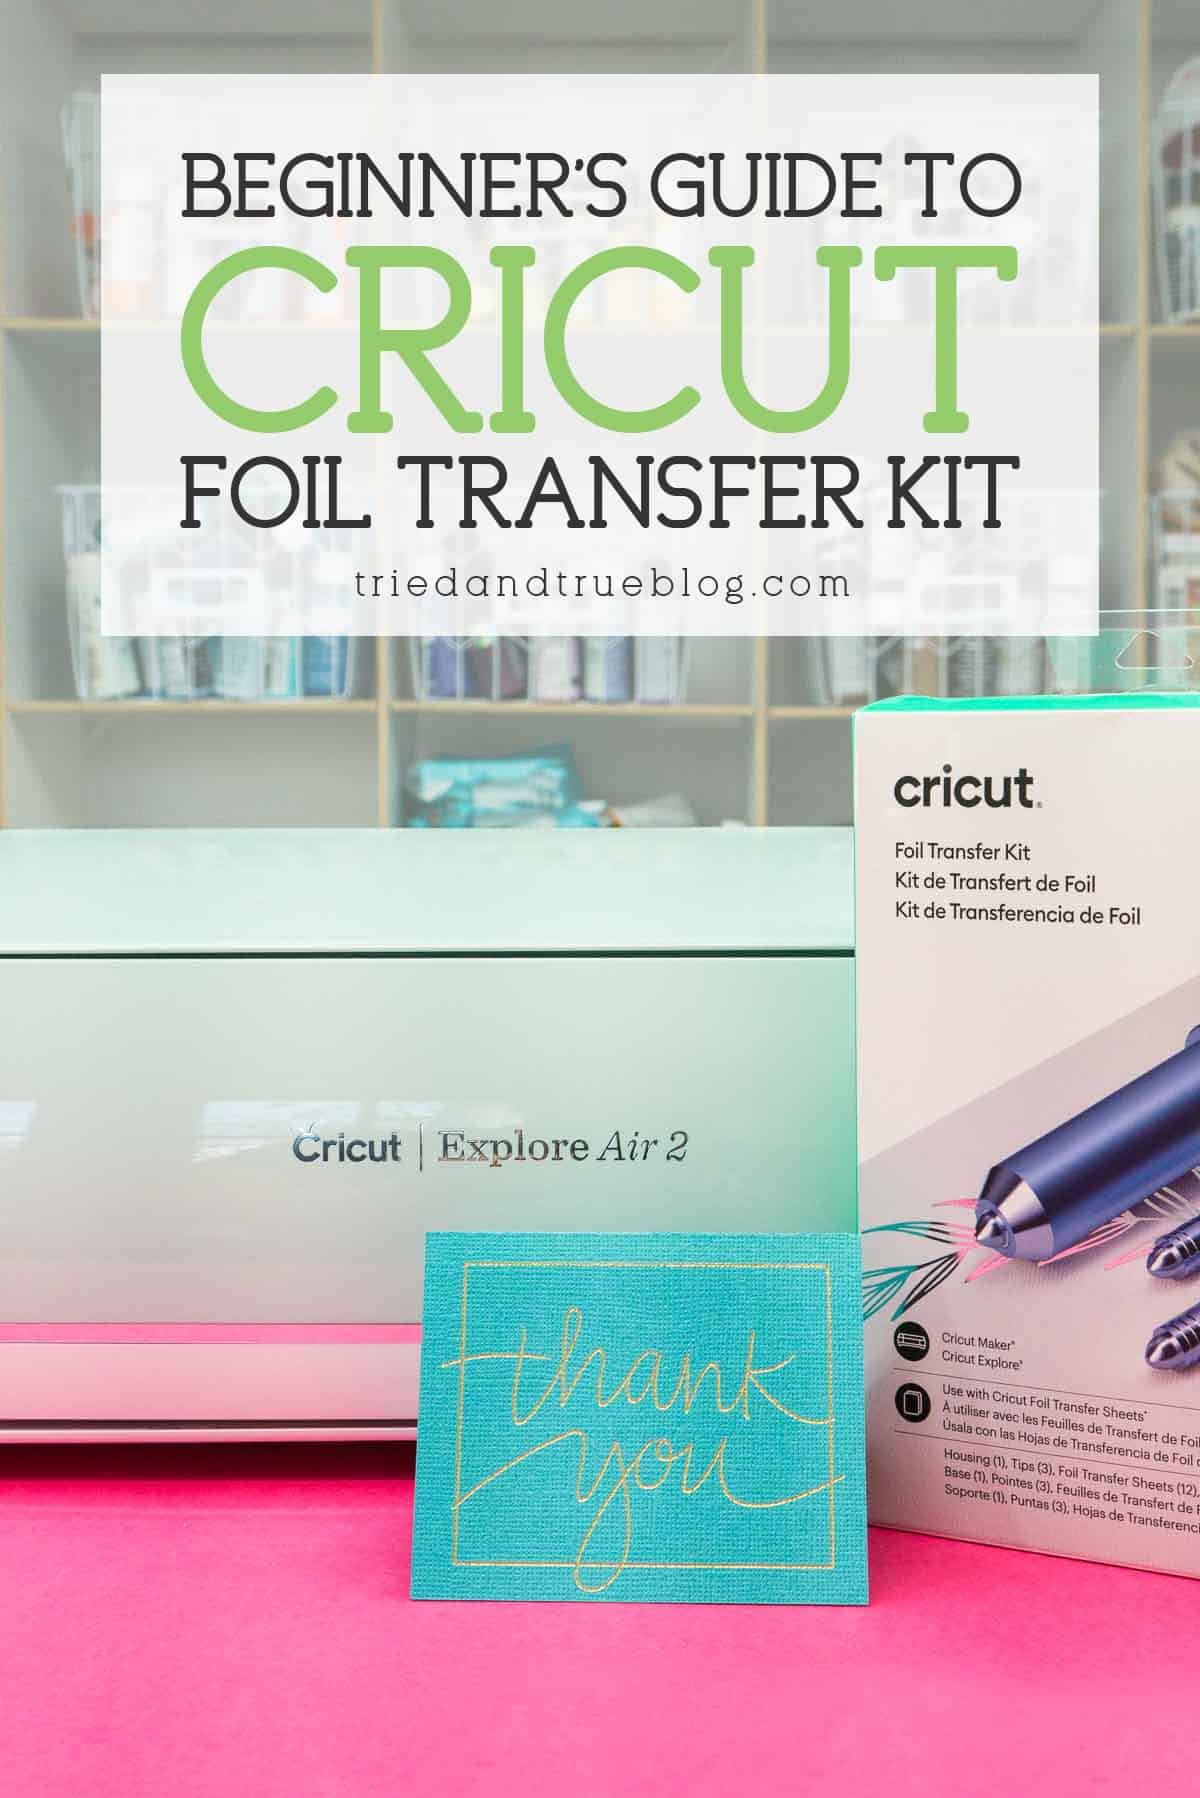 Cricut Foil Transfer Kit in front of "Thank you" card and Cricut Explore Air 2.